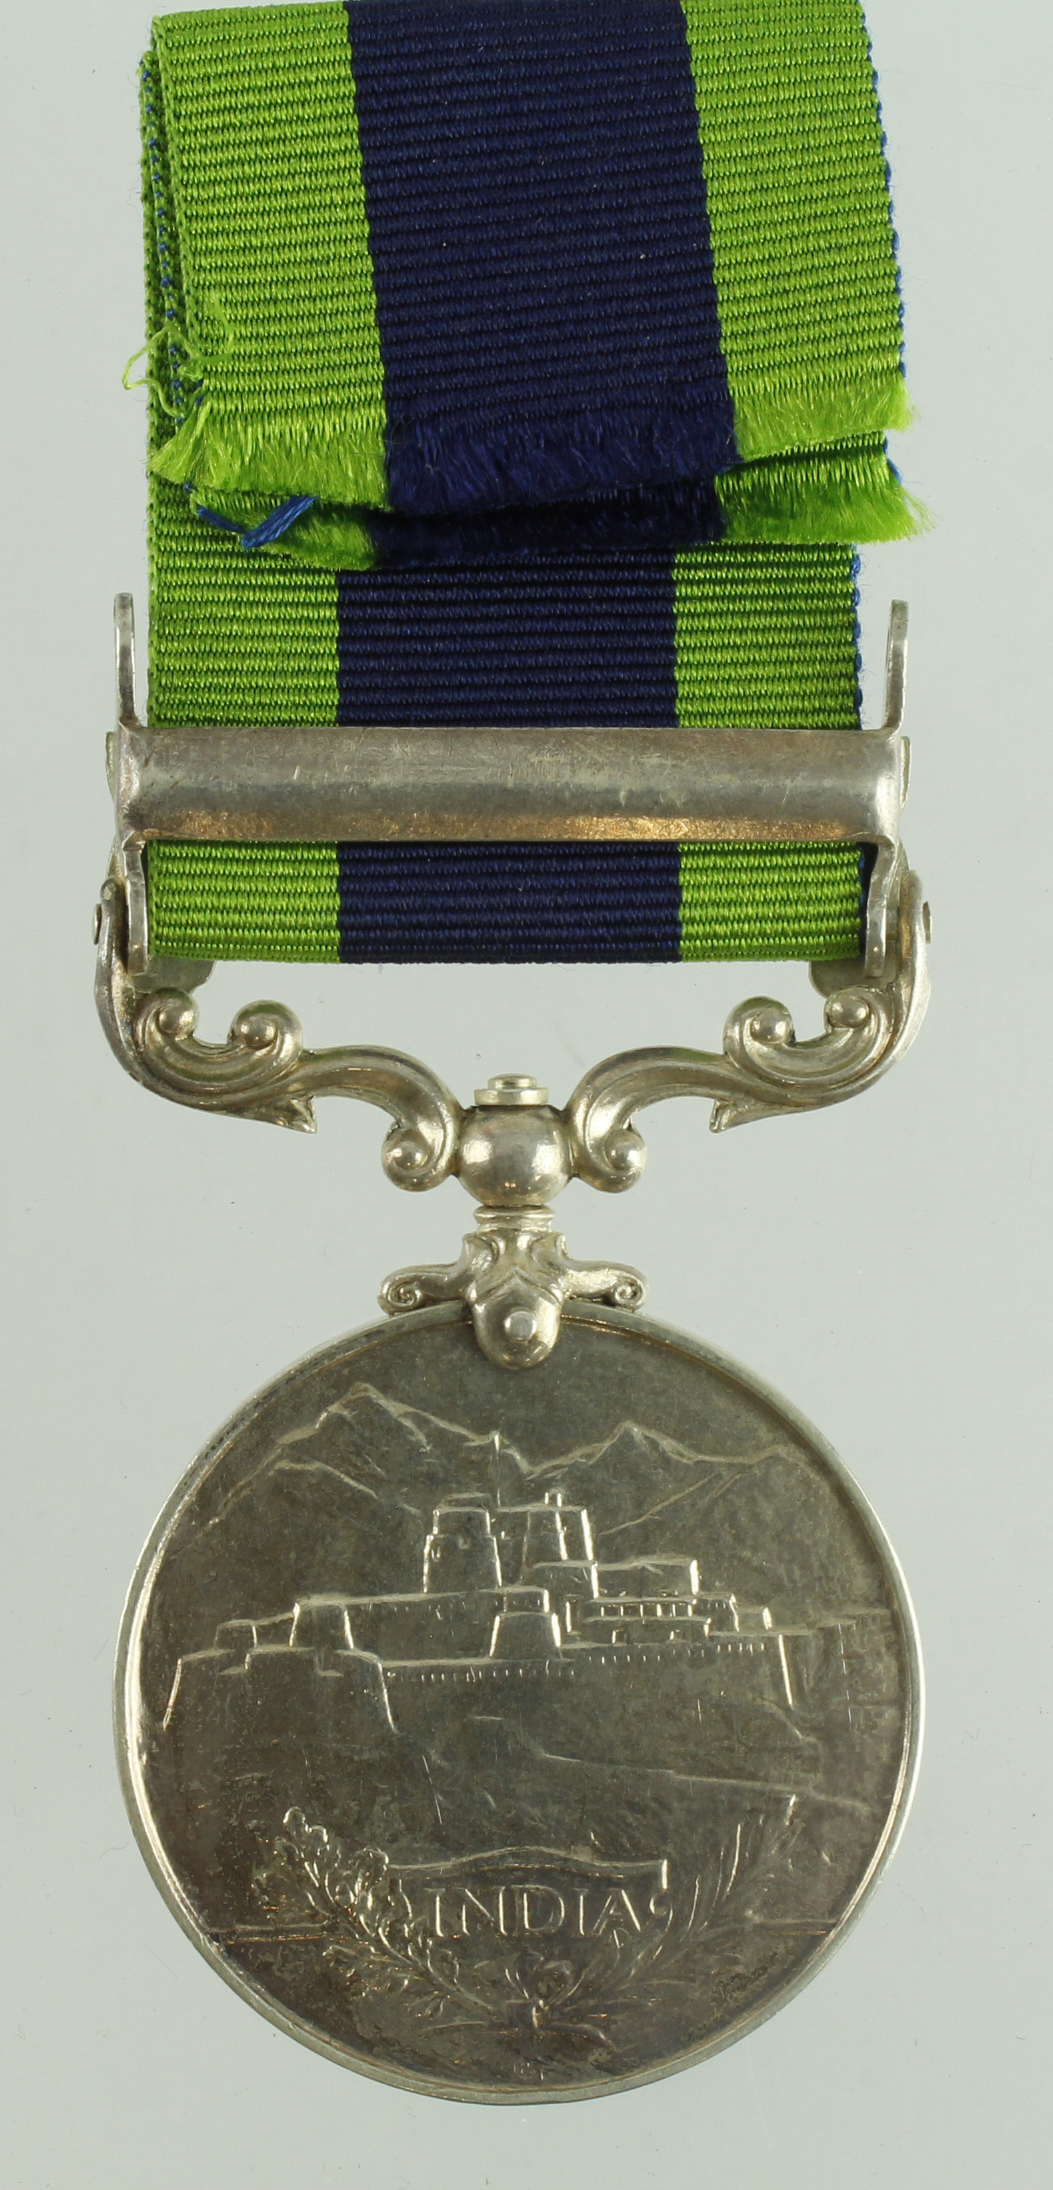 IGS GV with clasp NWF 1930-31 (3594237 Pte H Russell Bord R) served 2nd Bn - Bild 2 aus 2